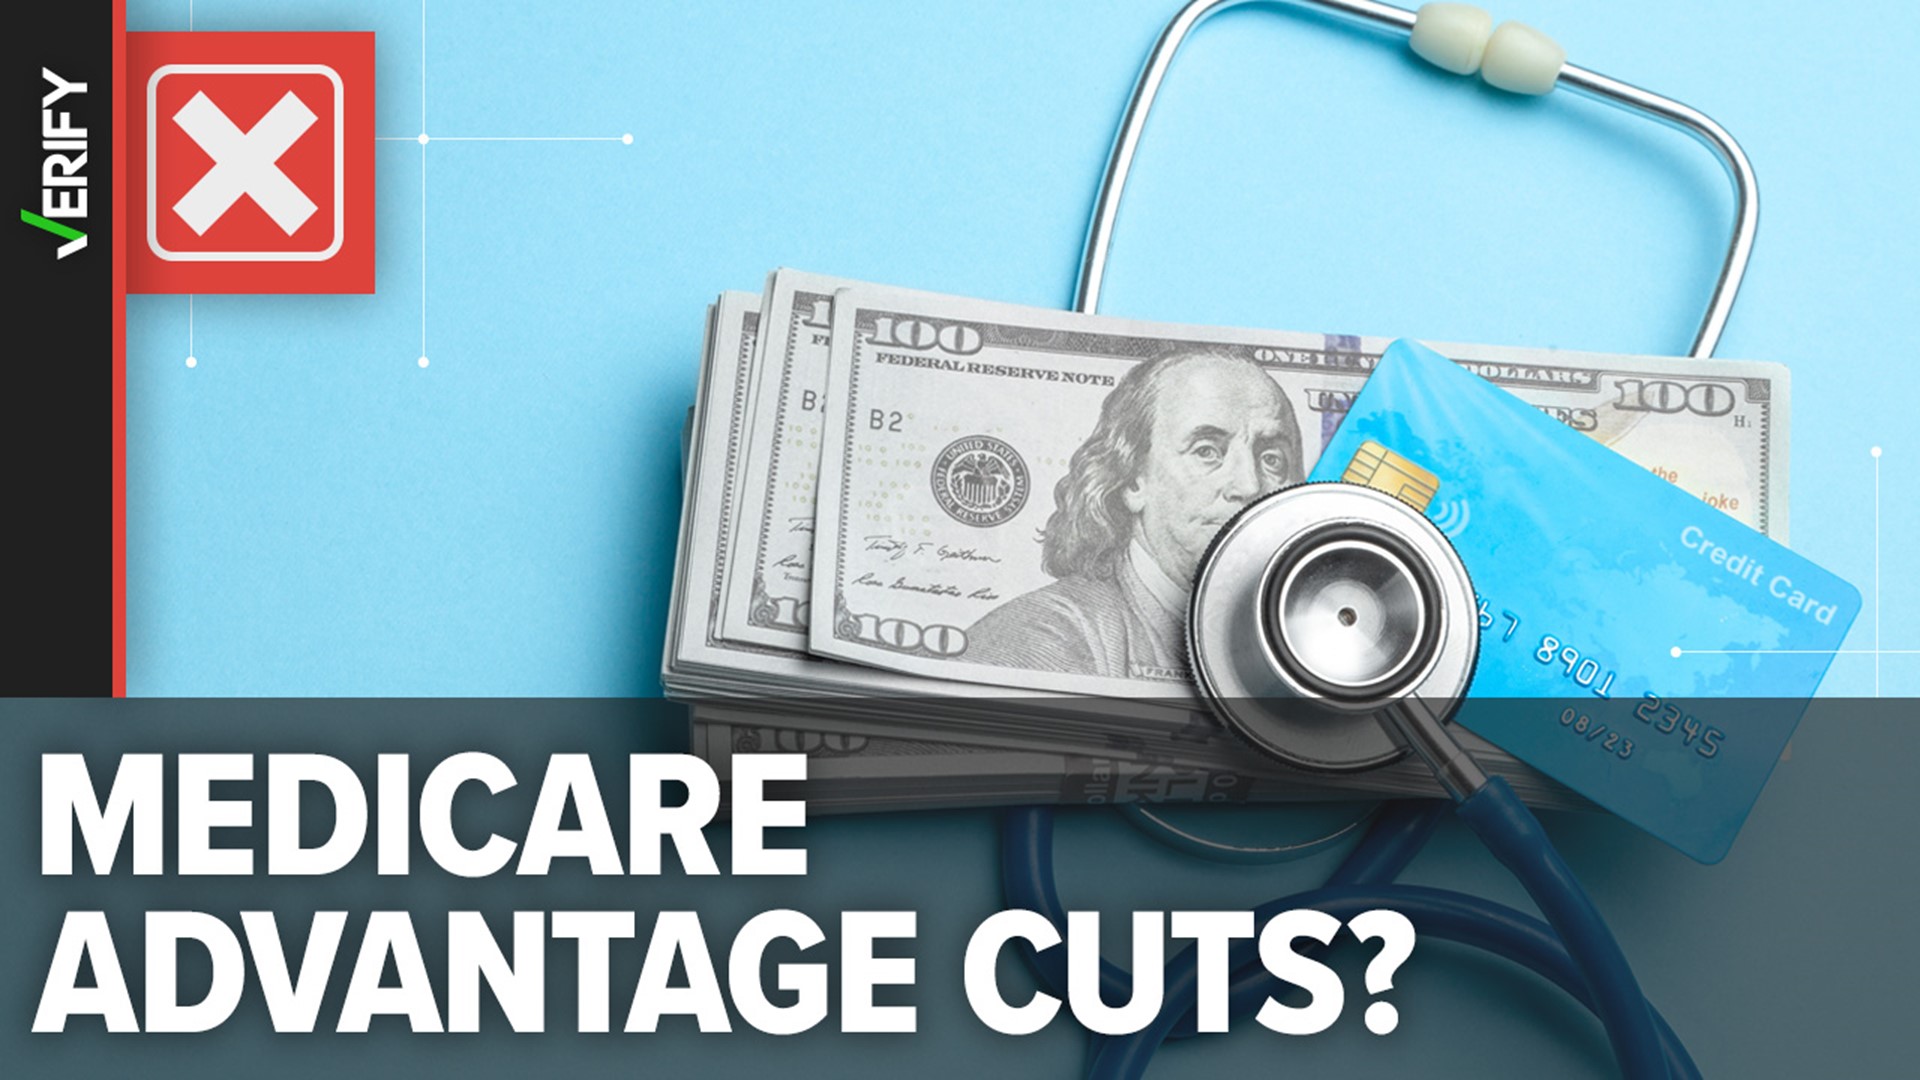 Many VERIFY readers have asked if the Biden administration is proposing cuts to Medicare Advantage. Here’s why those claims are false.